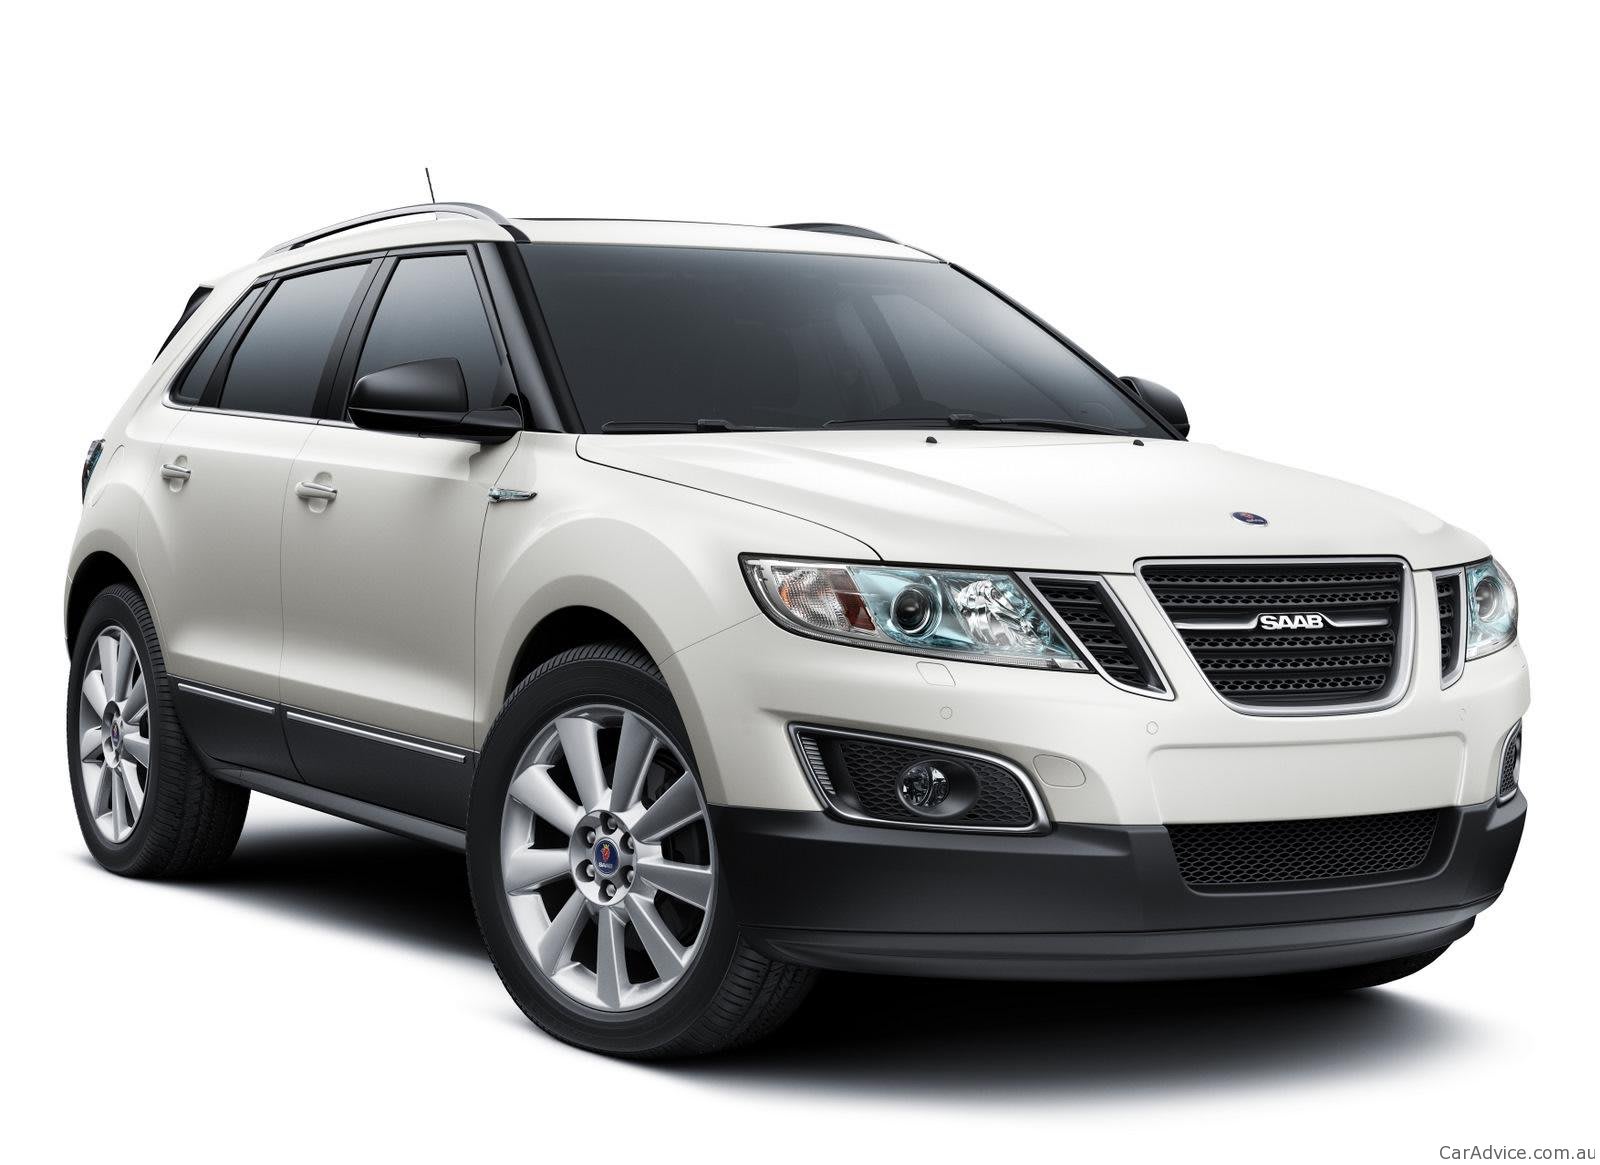 Saab 9-4X goes on sale in the US - Drive